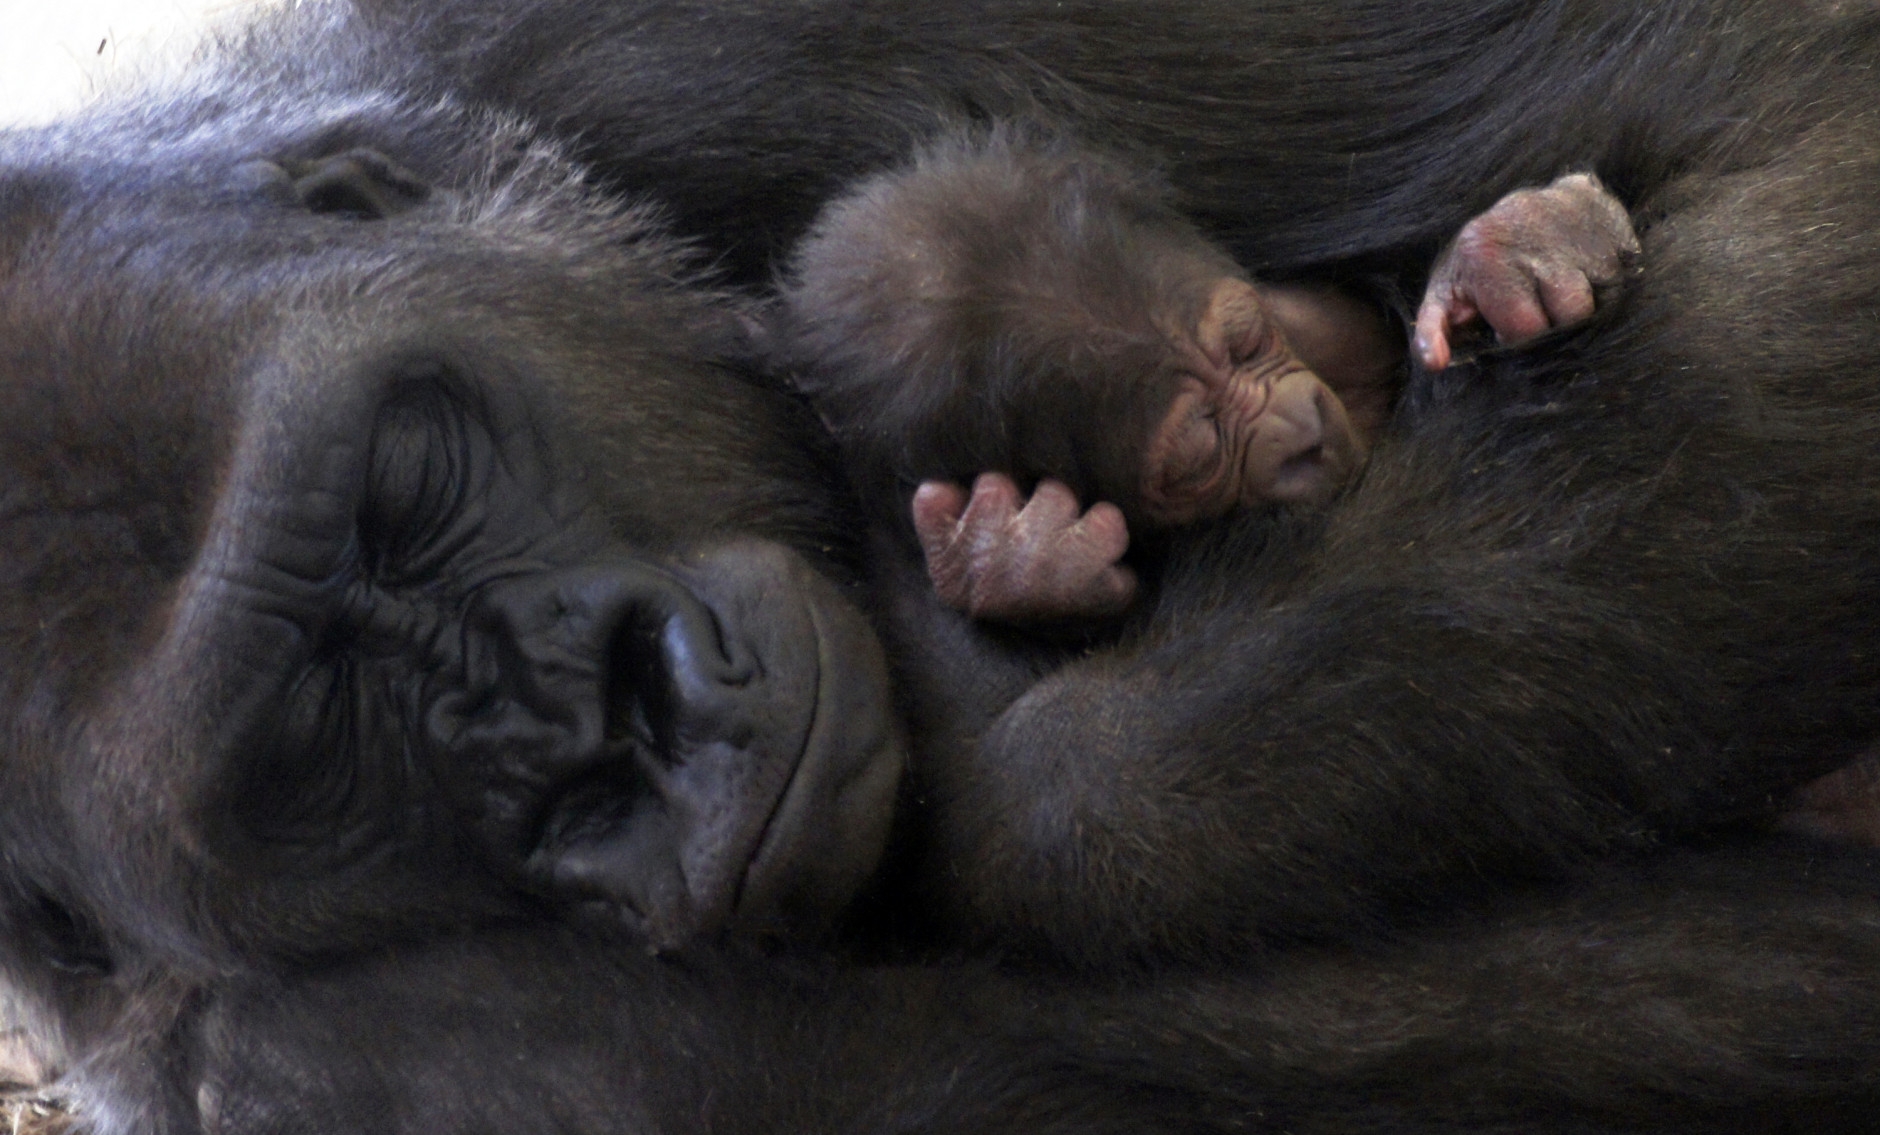 In this Feb. 23, 2015 photo provided by the Como Zoo, Dara, a western lowland gorilla, rests with her new female gorilla at the Como Zoo in St. Paul, Minn. The new baby is named Arlene and was born at about five pounds on Feb. 22. (AP Photo/Como Zoo)